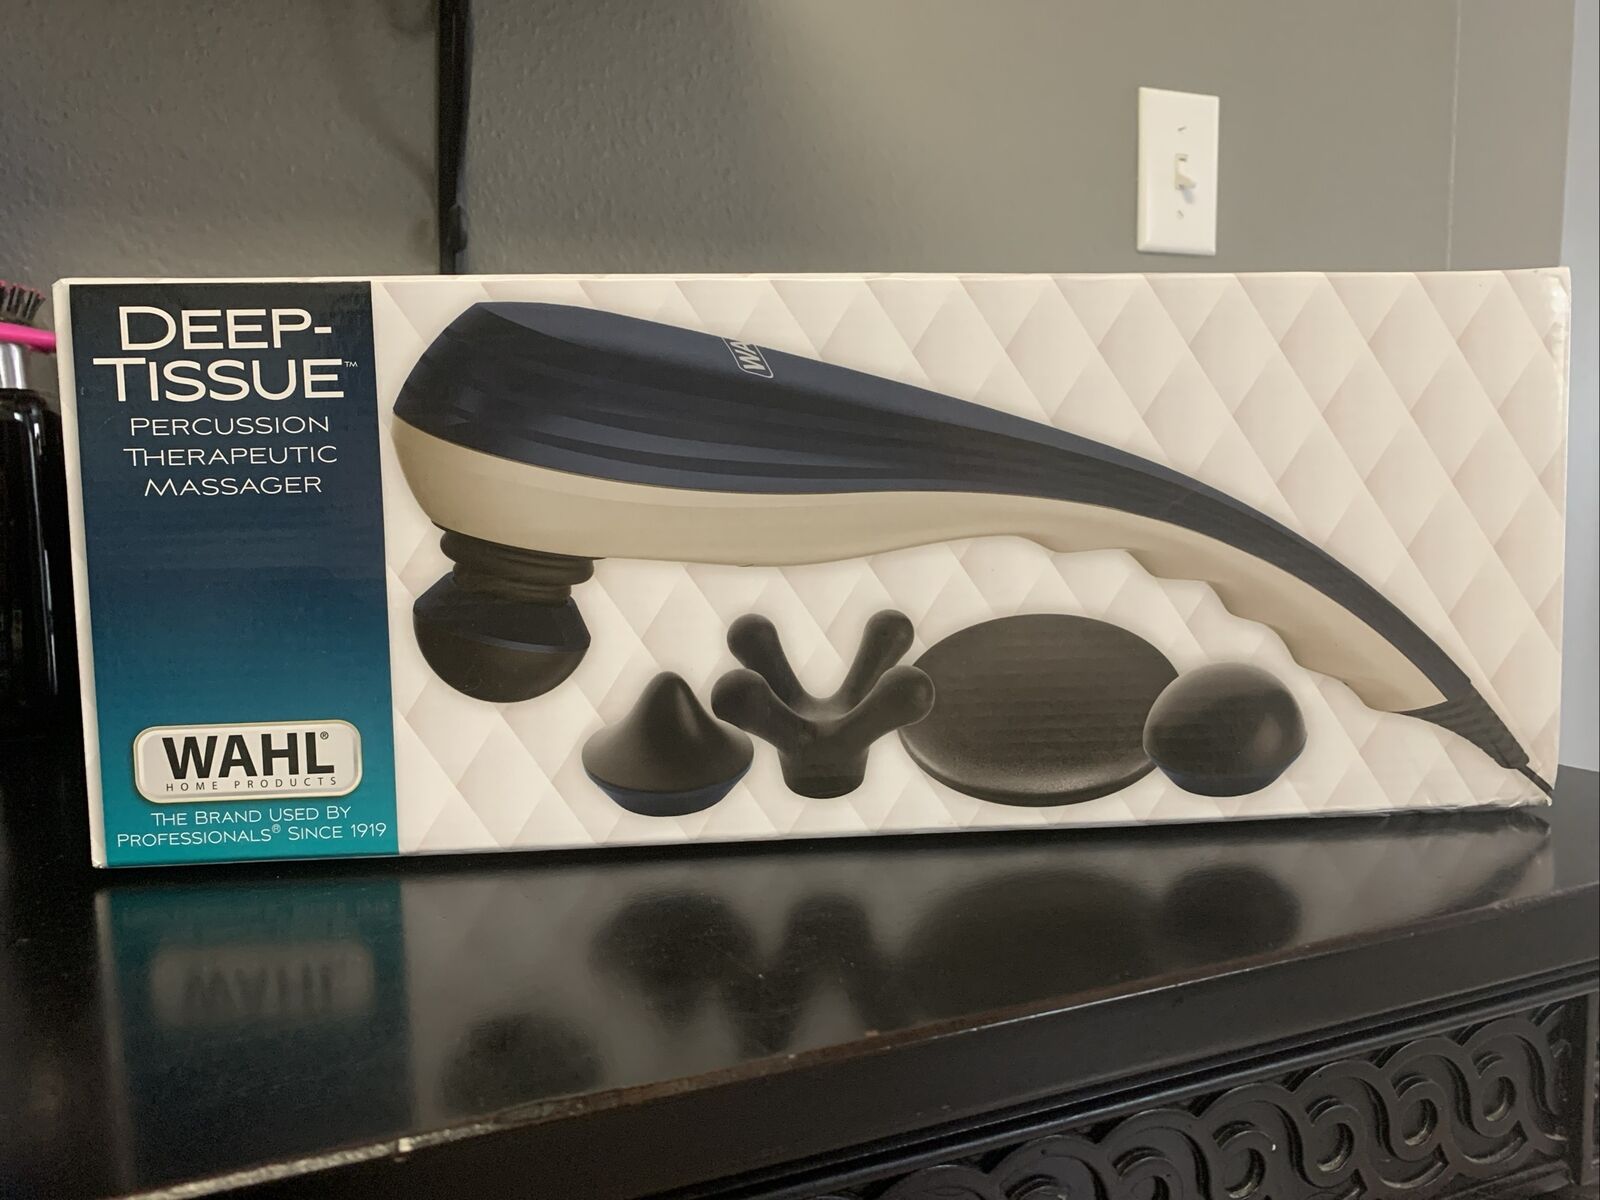 Wahl 4290300 Deep-Tissue Percussion Therapeutic Massager. Verified It Works